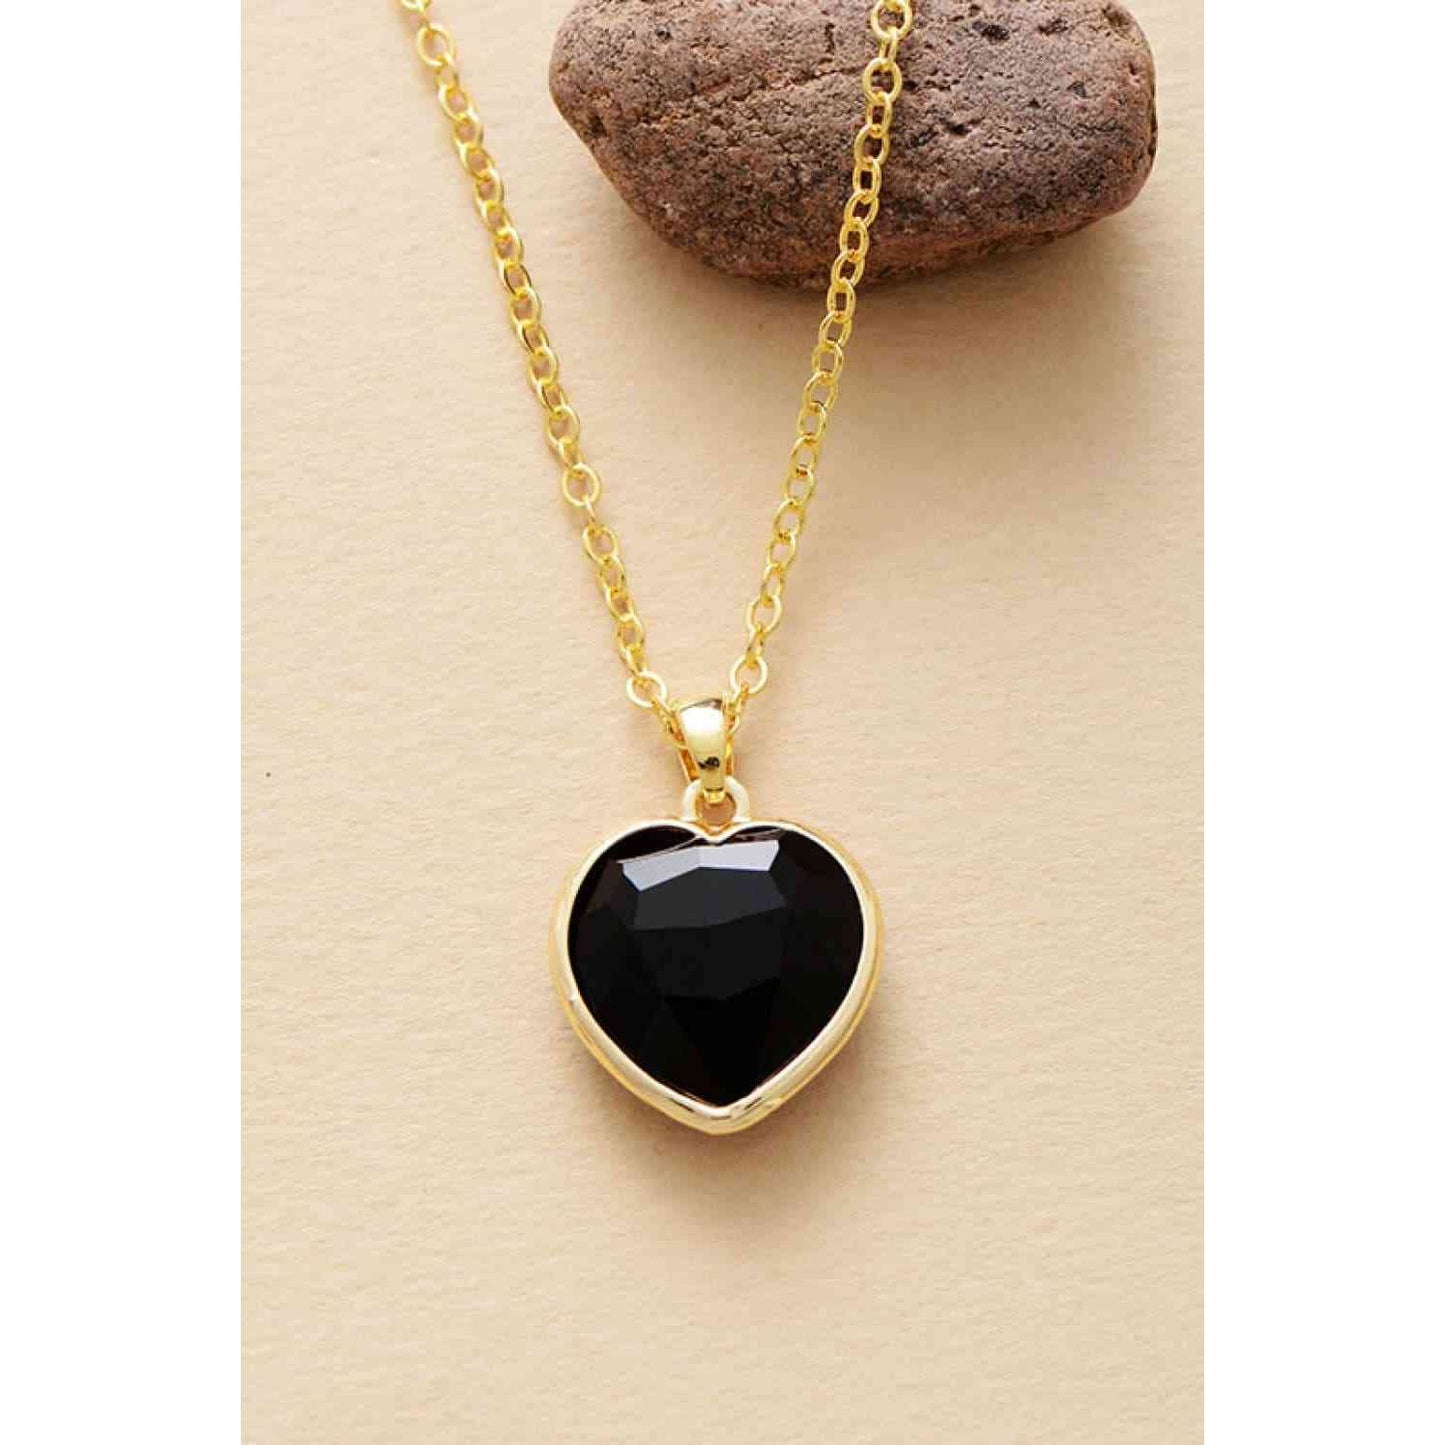 Natural Stone Heart Pendant Necklace